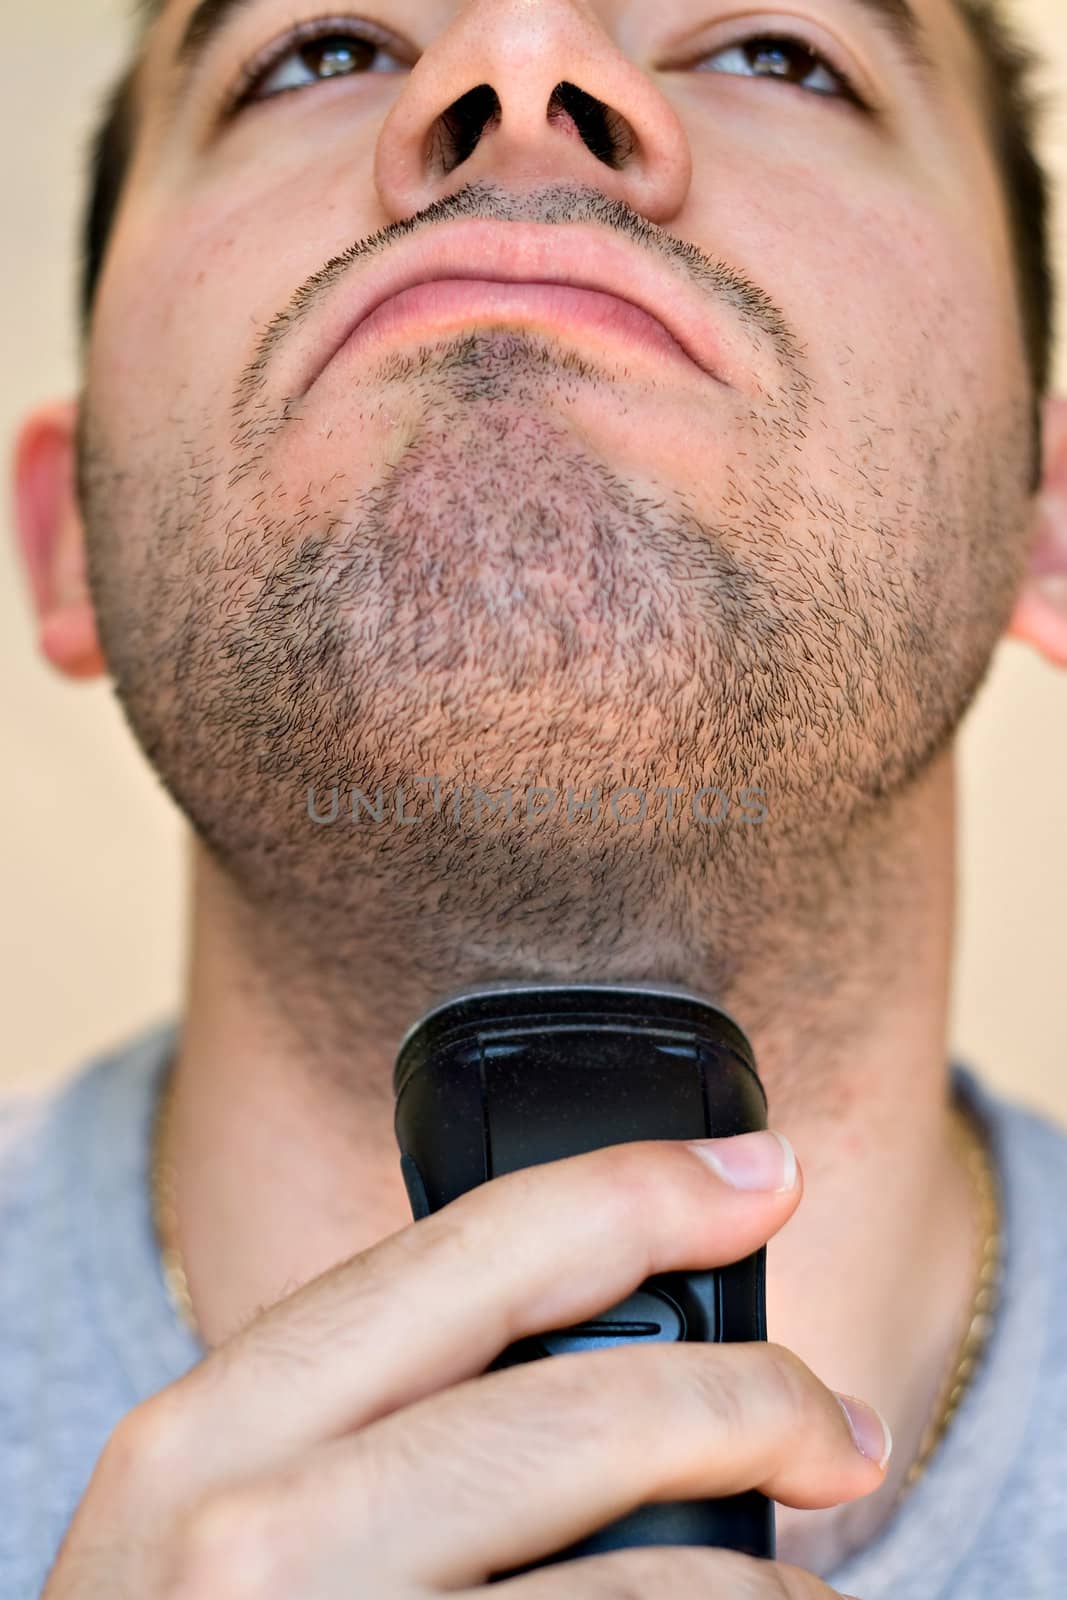 A closeup of a young man shaving his beard off with an electric shaver.